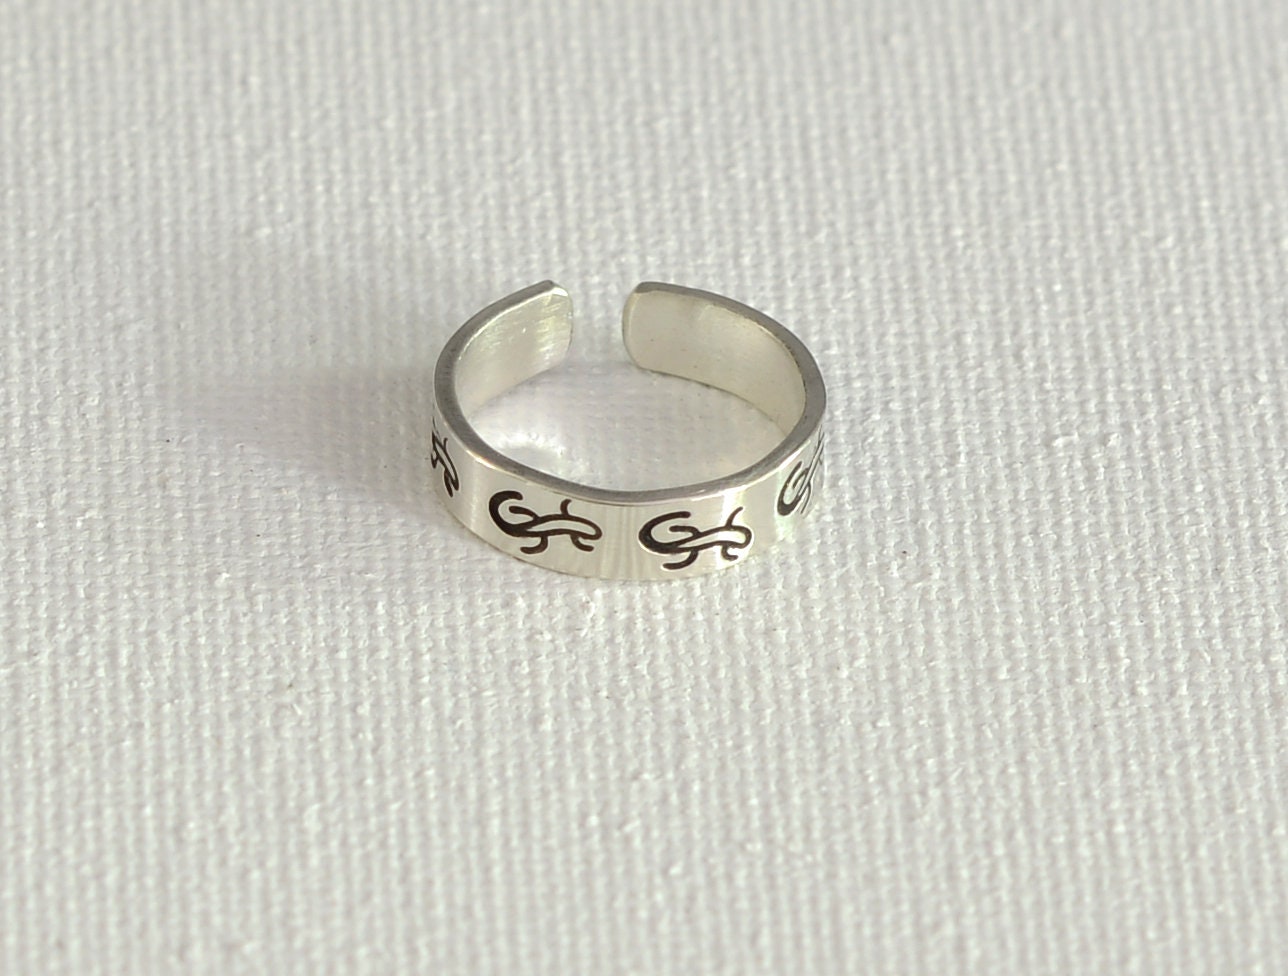 Sterling silver toe ring stamped with dainty lizard theme